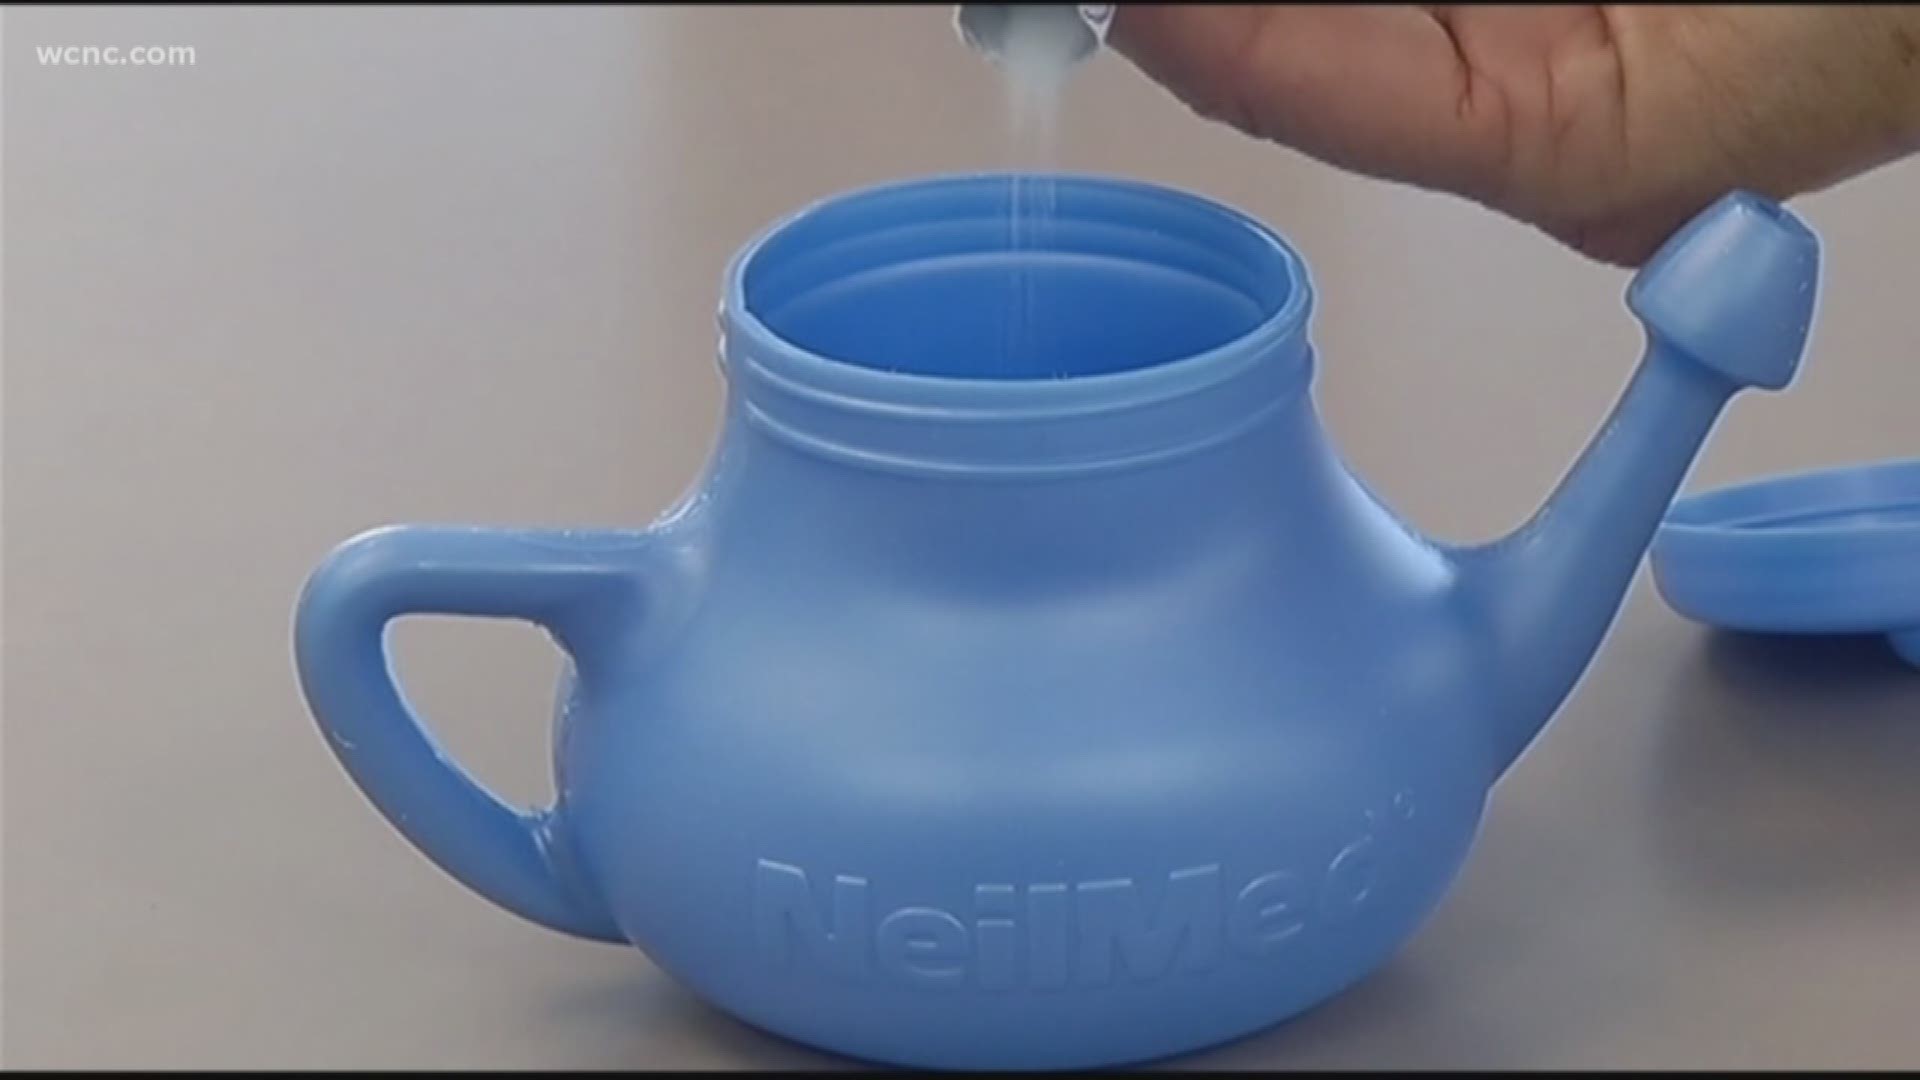 The CDC recommends if you use a a neti pot, you only use distilled, sterile or cooled boiled water for sinus irrigation to protect yourself from infection.